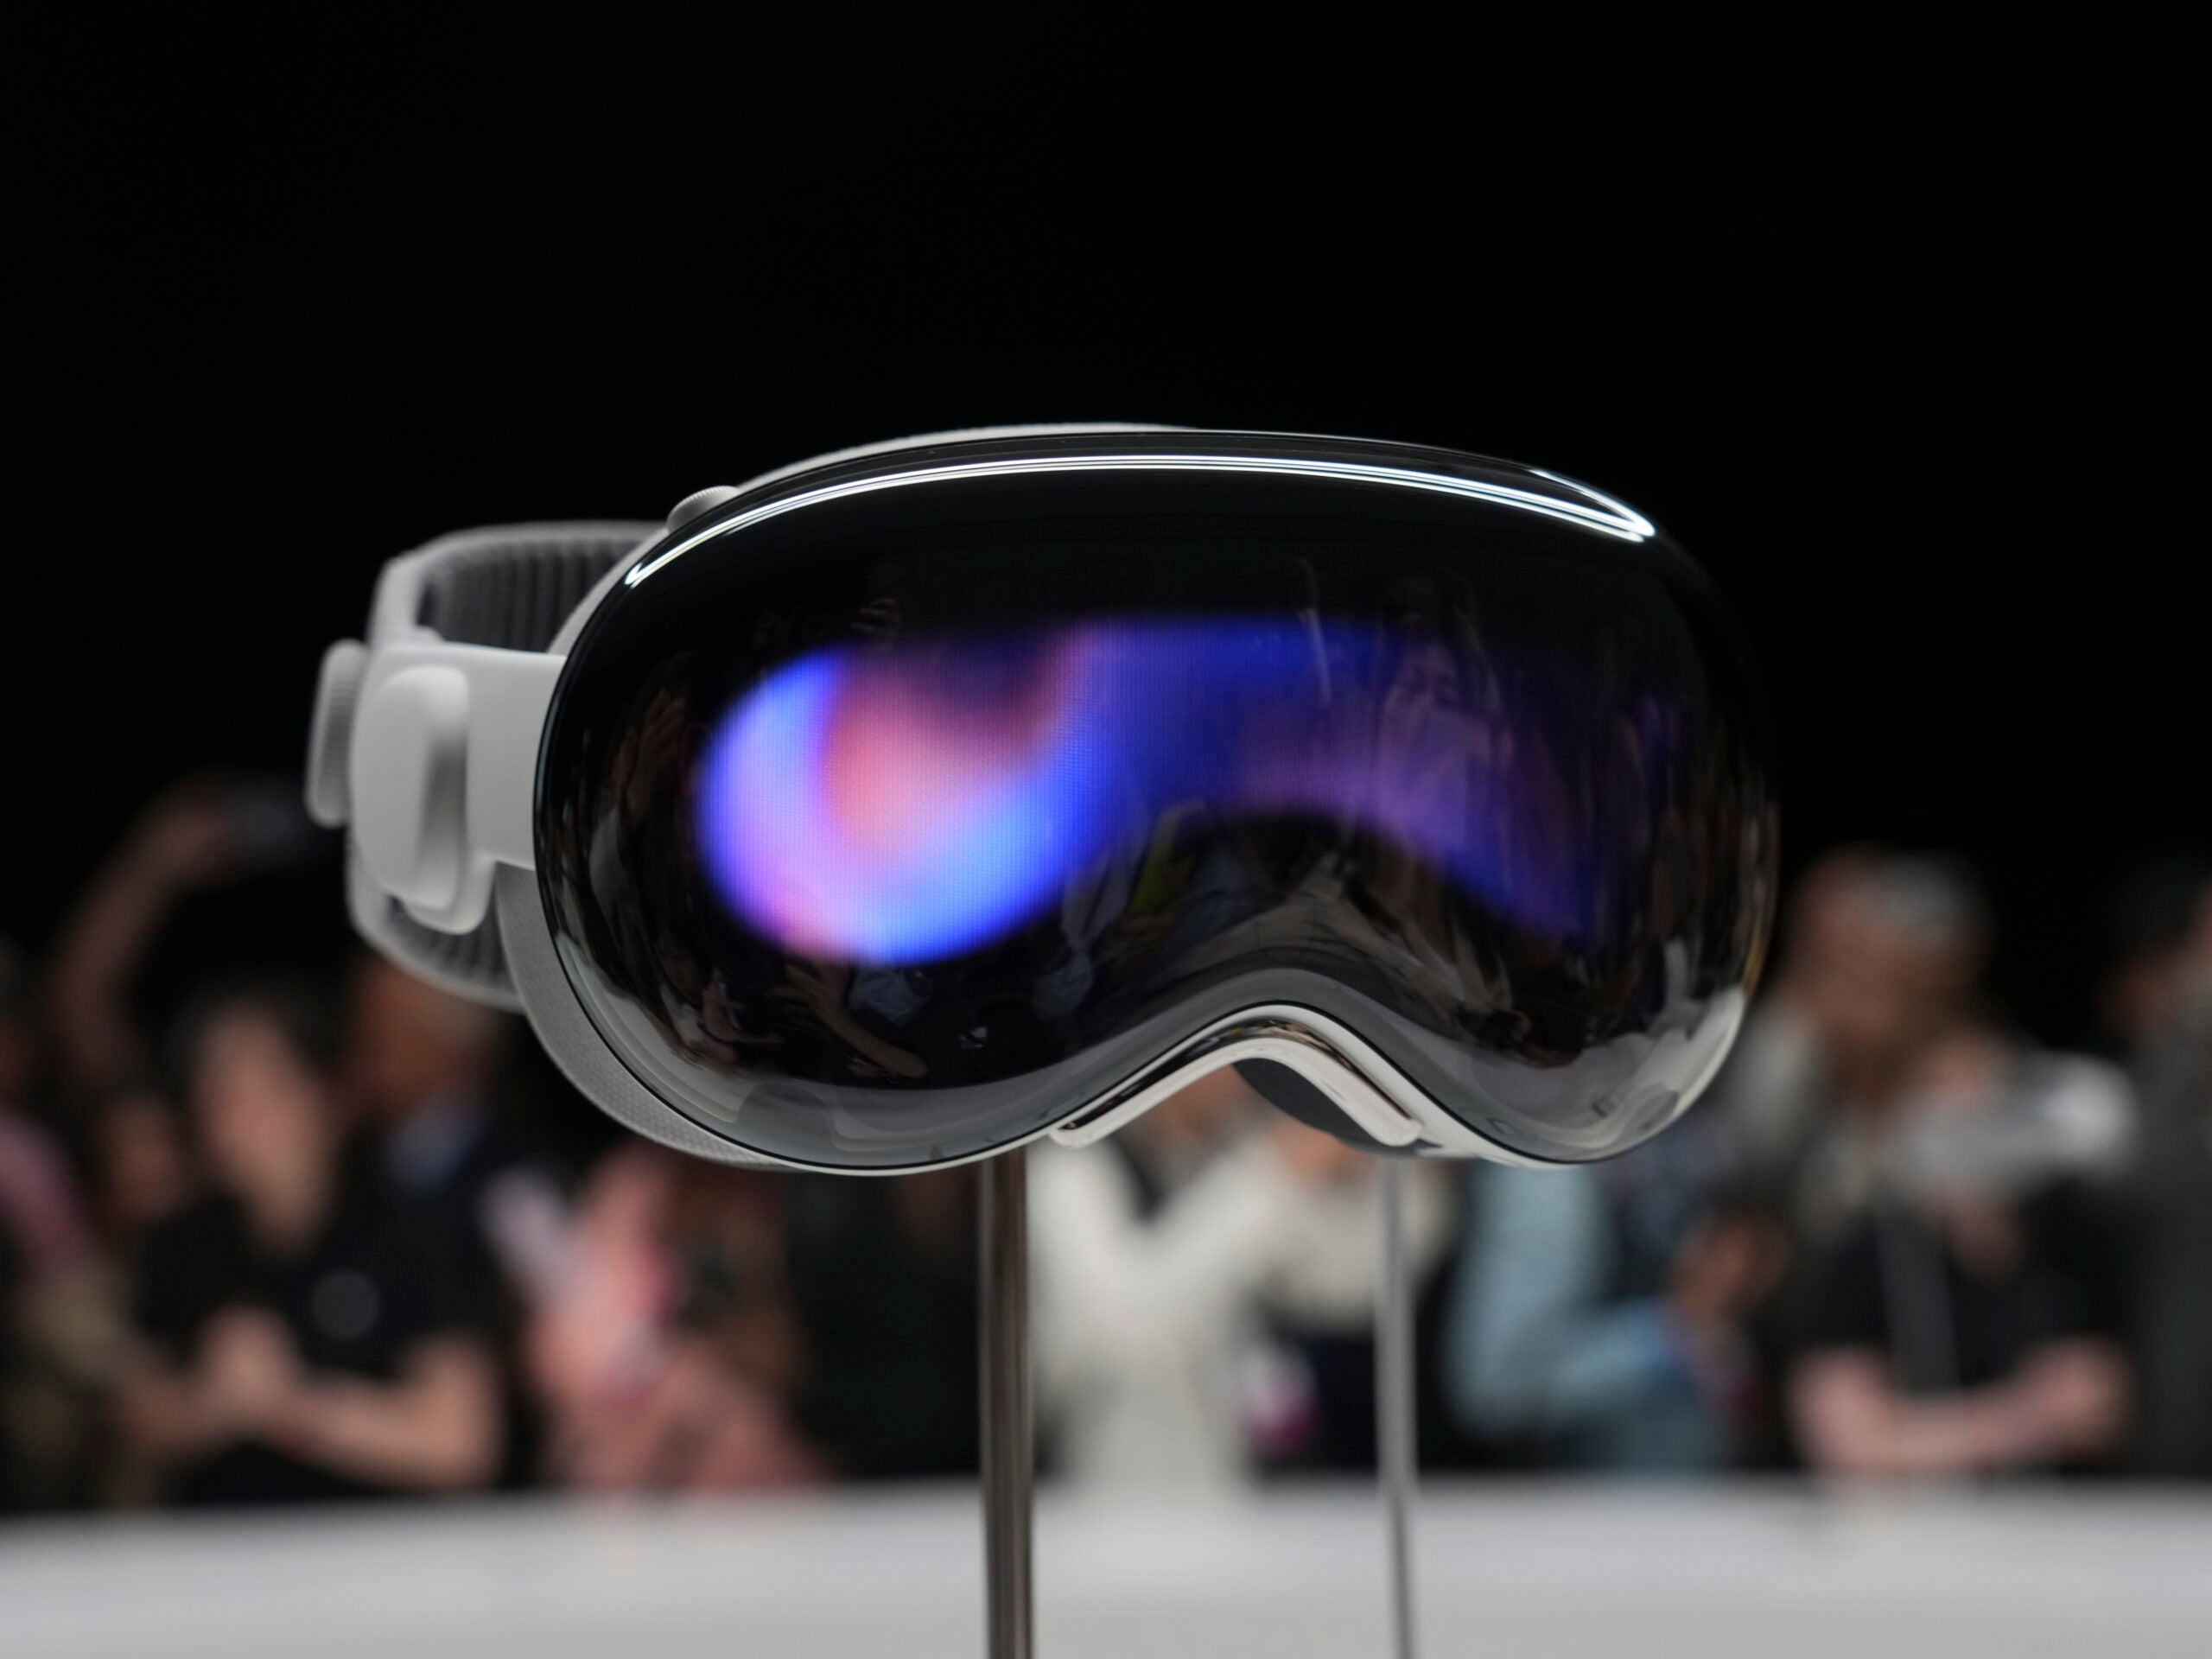 Apple’s Vision Pro headset, a new augmented reality device.